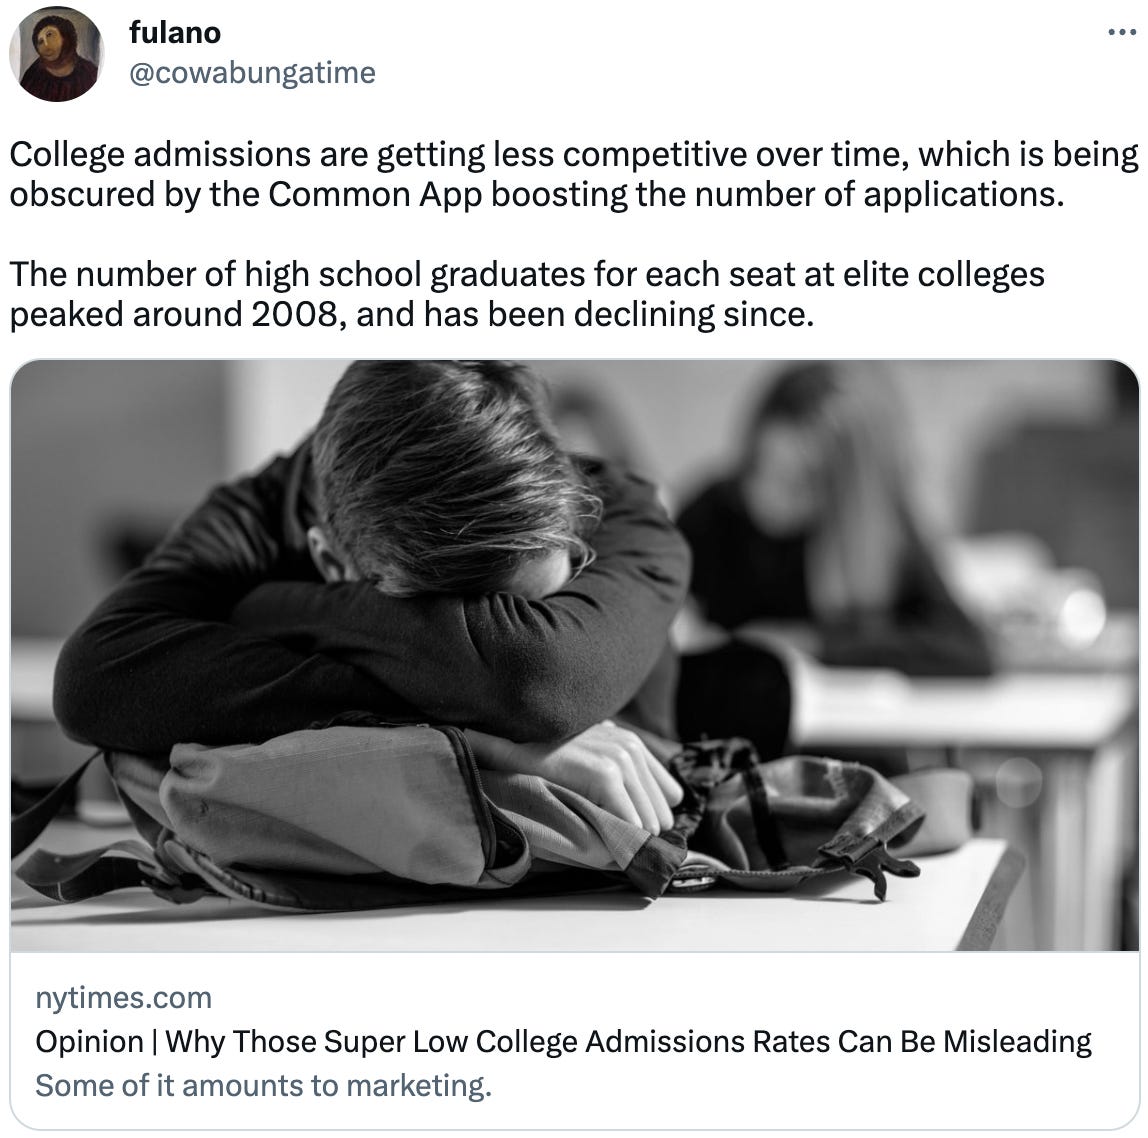  fulano @cowabungatime College admissions are getting less competitive over time, which is being obscured by the Common App boosting the number of applications.  The number of high school graduates for each seat at elite colleges peaked around 2008, and has been declining since.